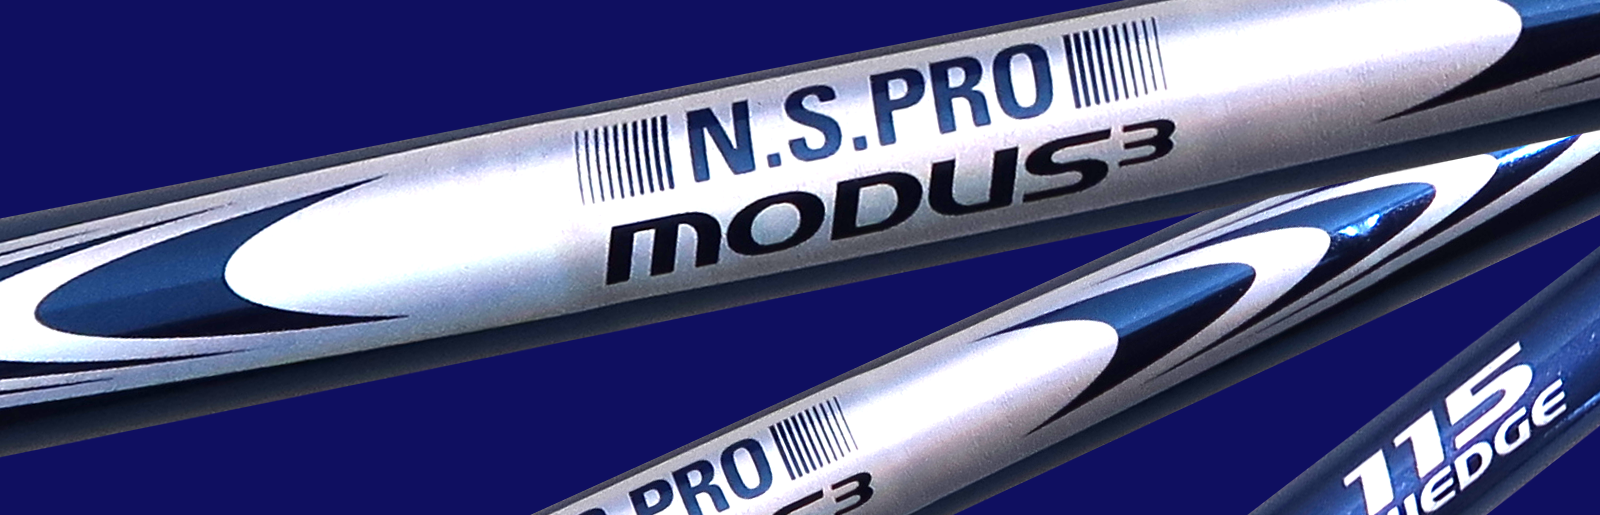 N.S.PRO MODUS³ WEDGE Blue Edition を数量限定で発売!!